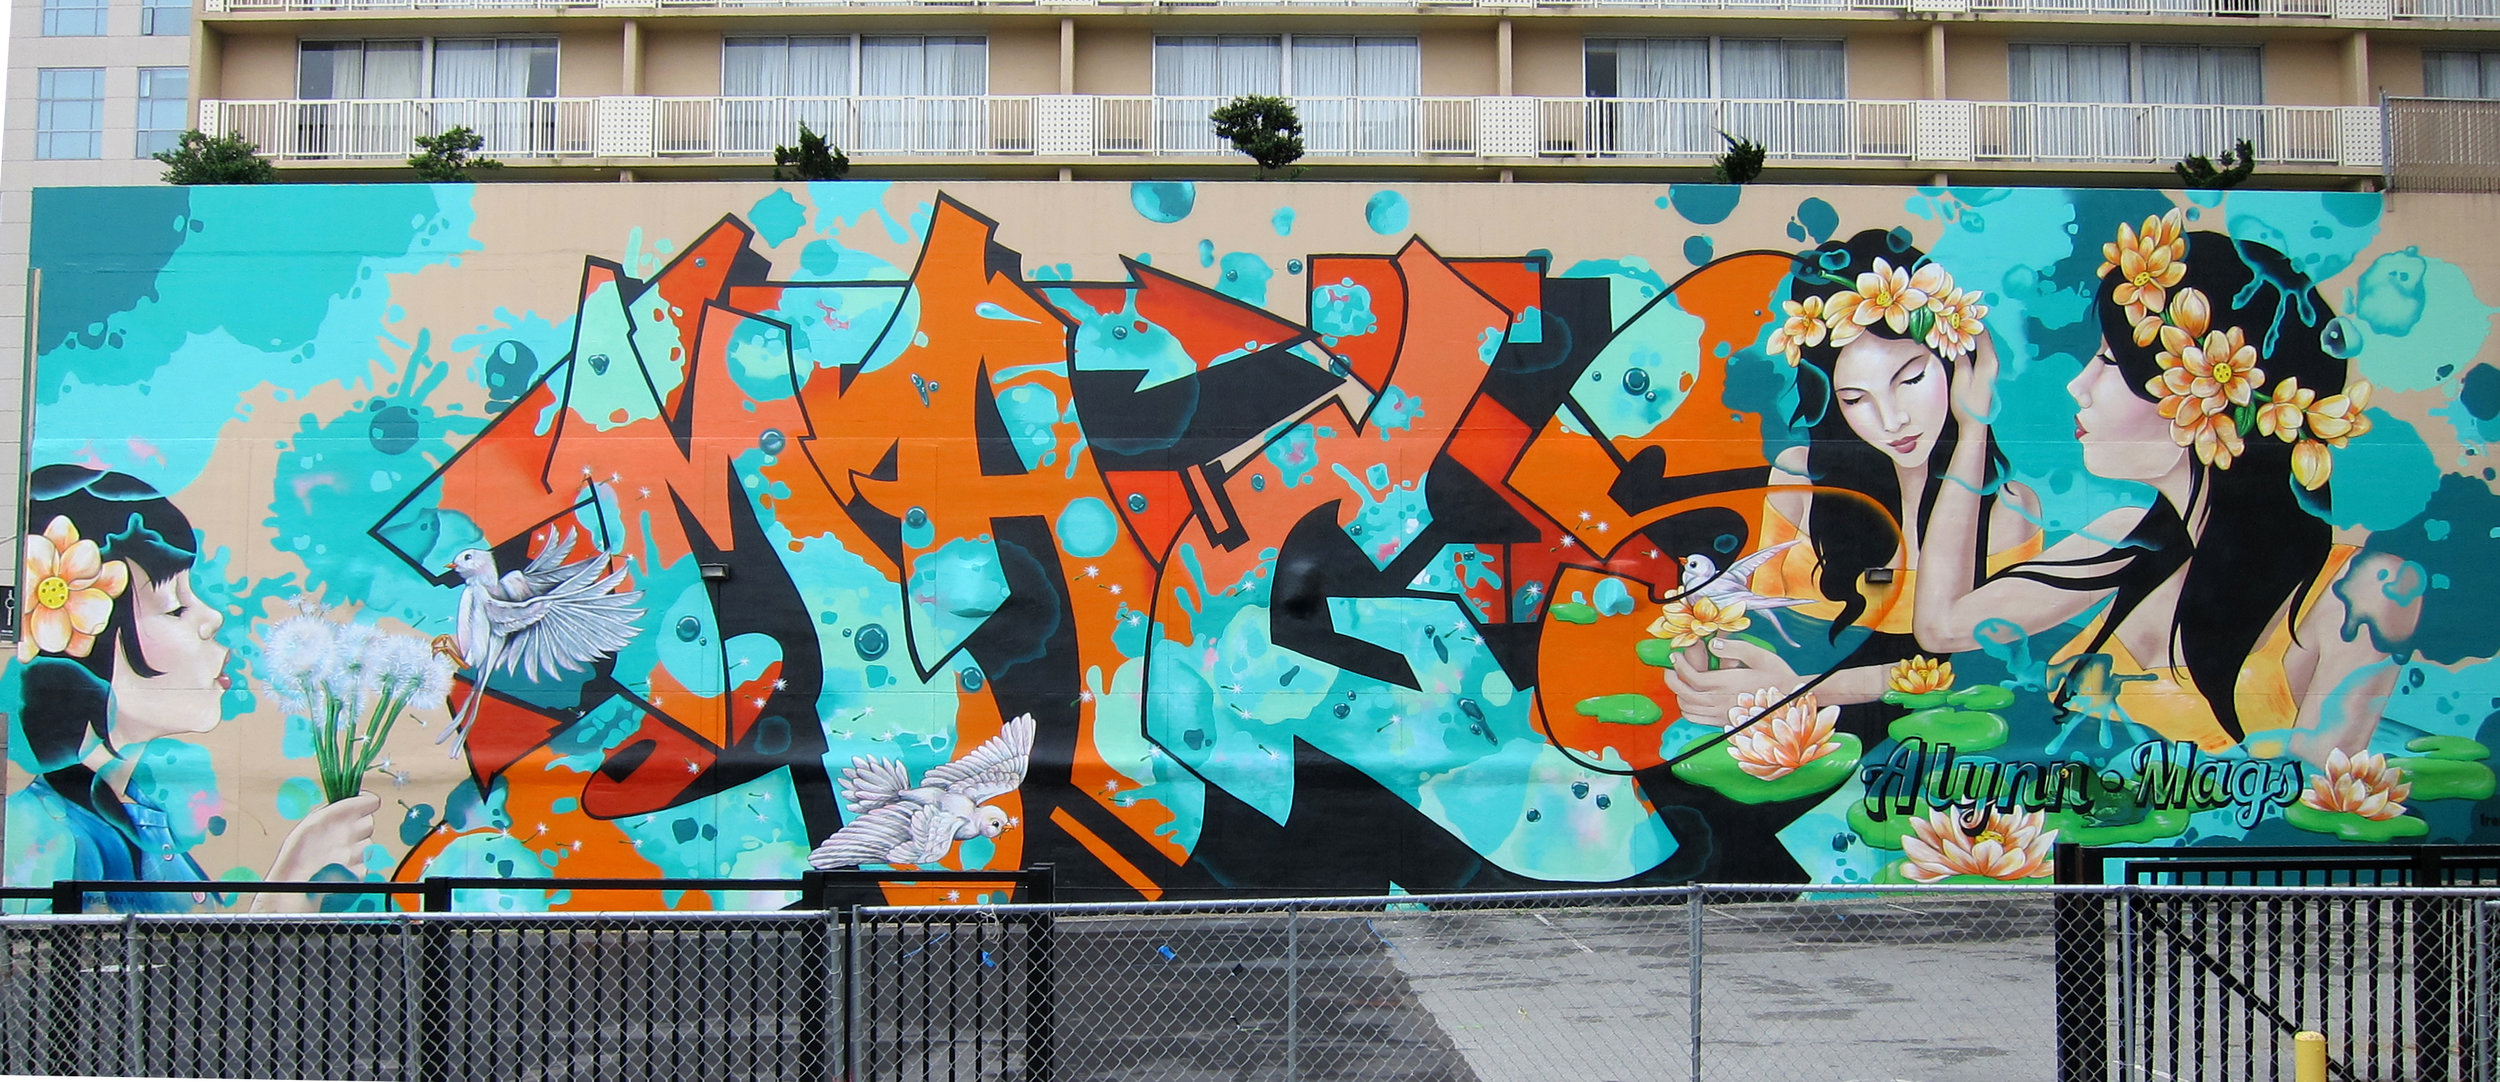 'Live Outside' mural collaboration with Lady Mags in SF, CA